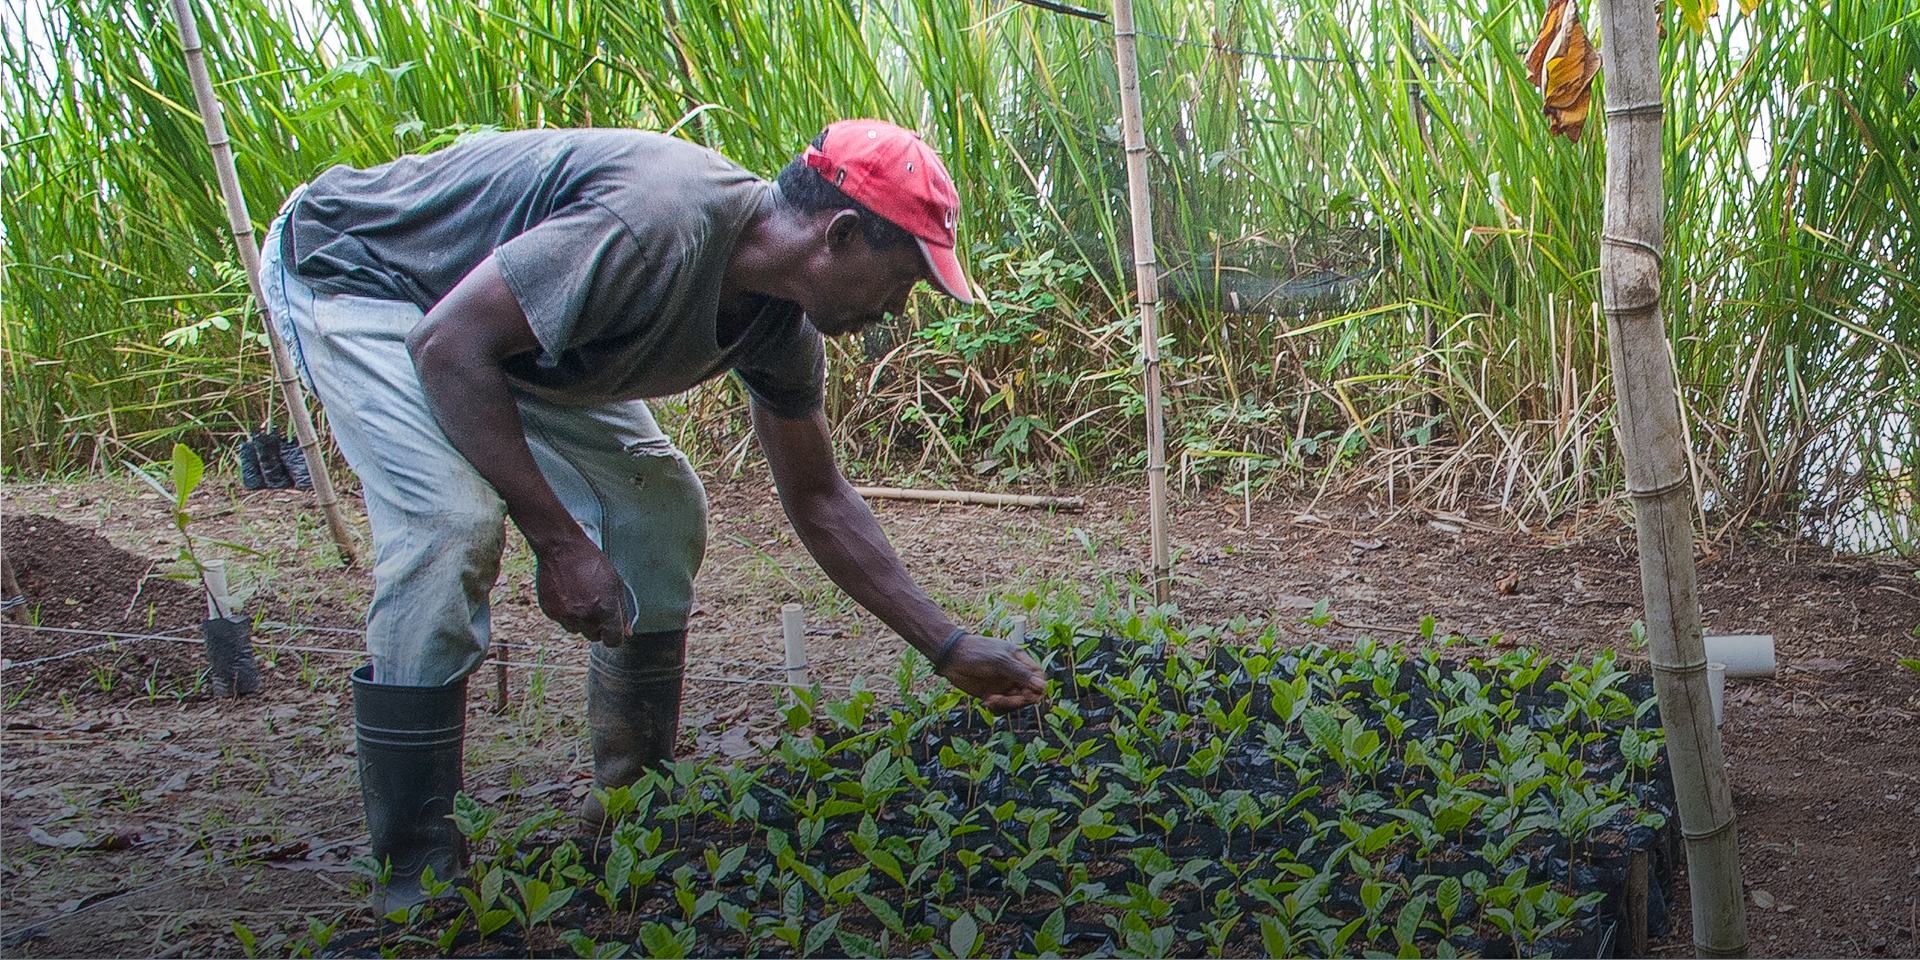 A man leaning over sprouting crops and inspecting them.